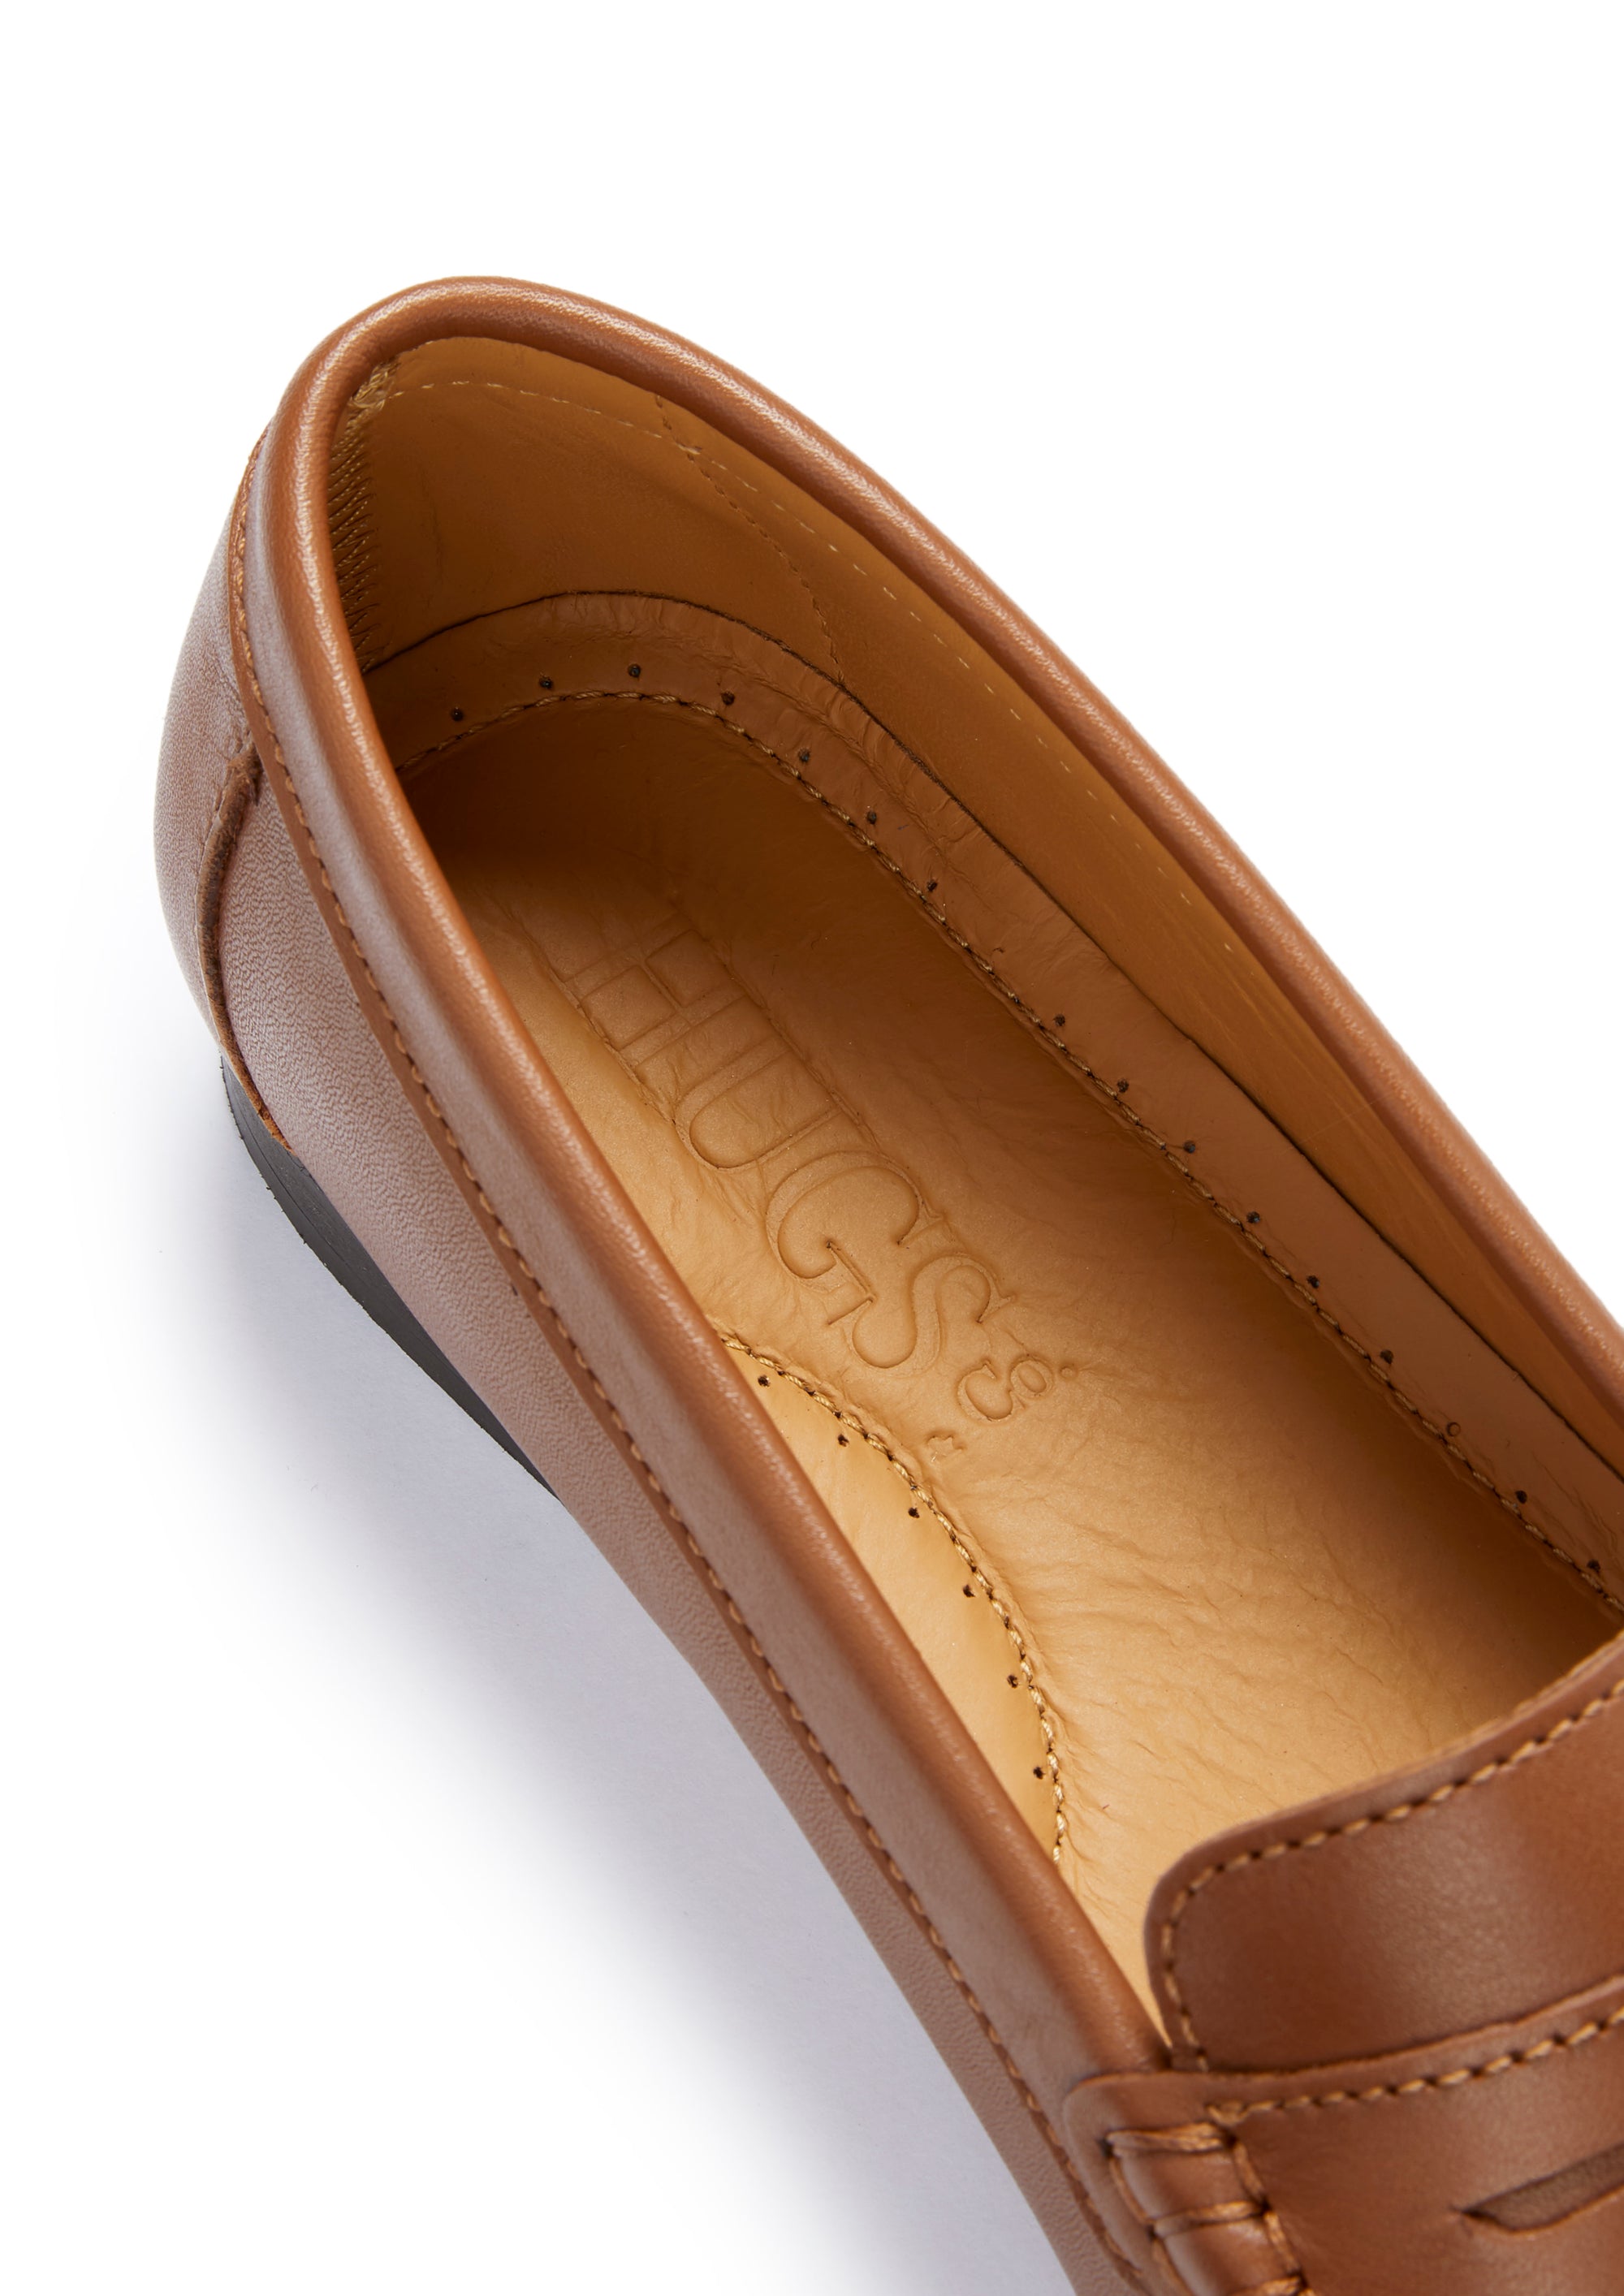 Women's Penny Loafers Leather Sole, tan leather